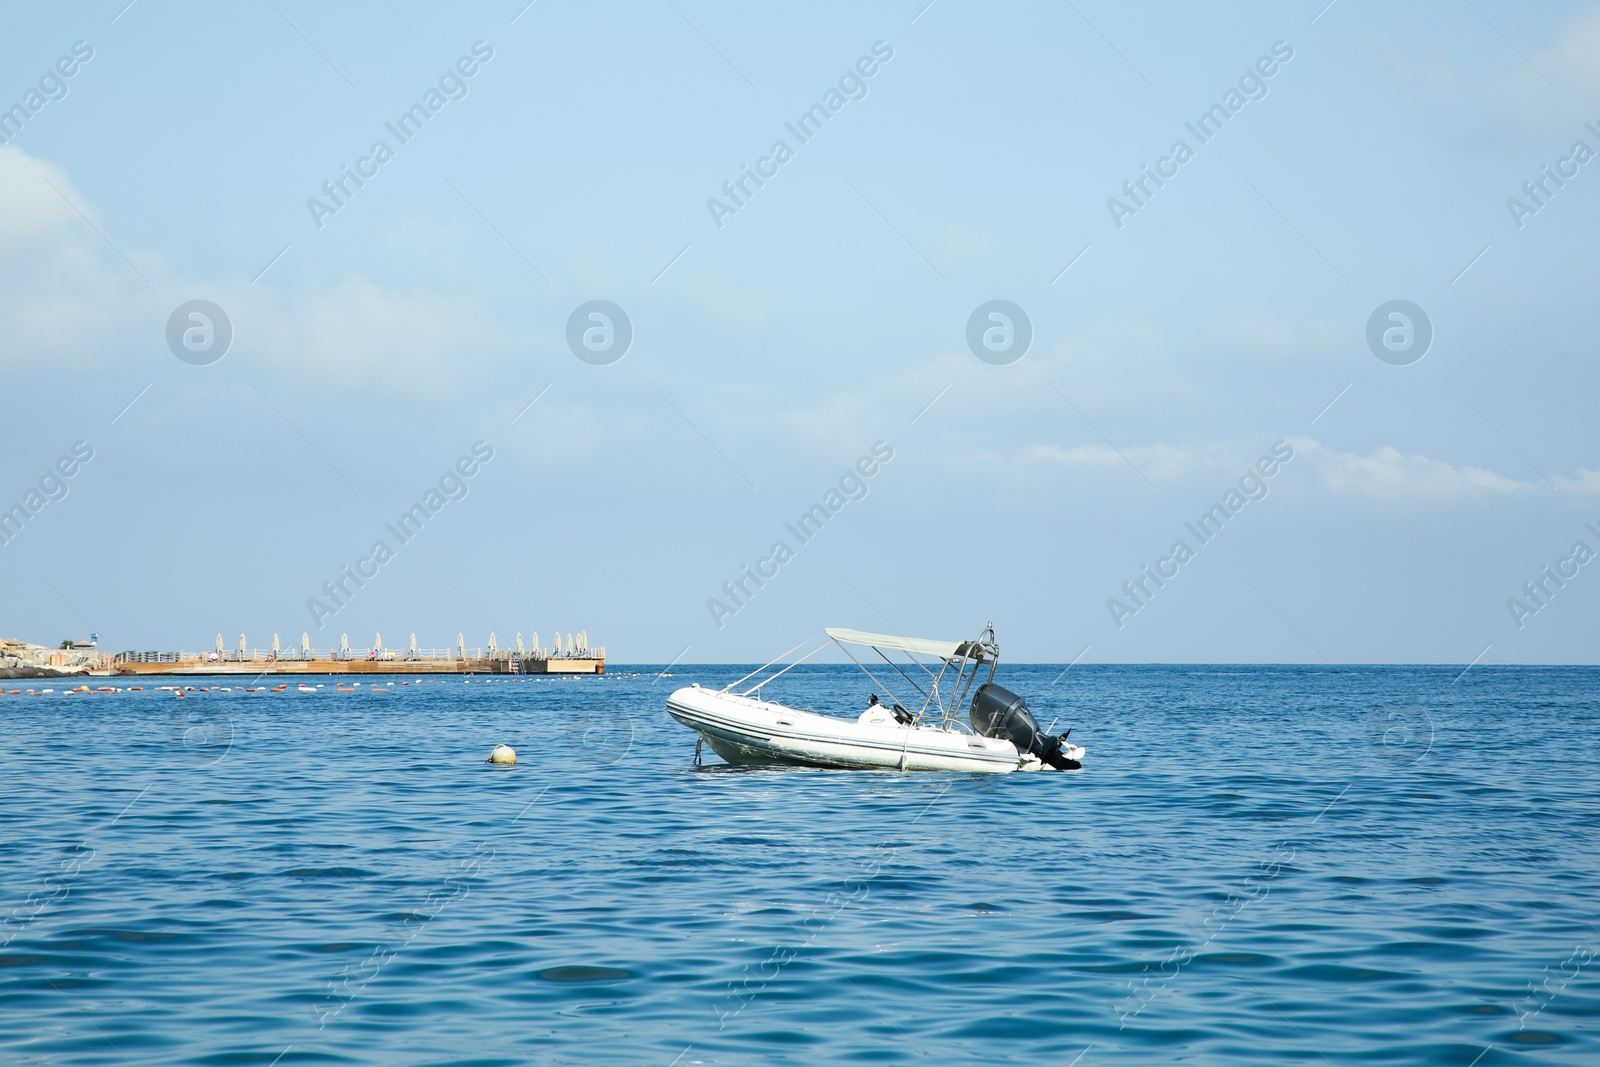 Photo of Inflatable boat on sea under blue sky